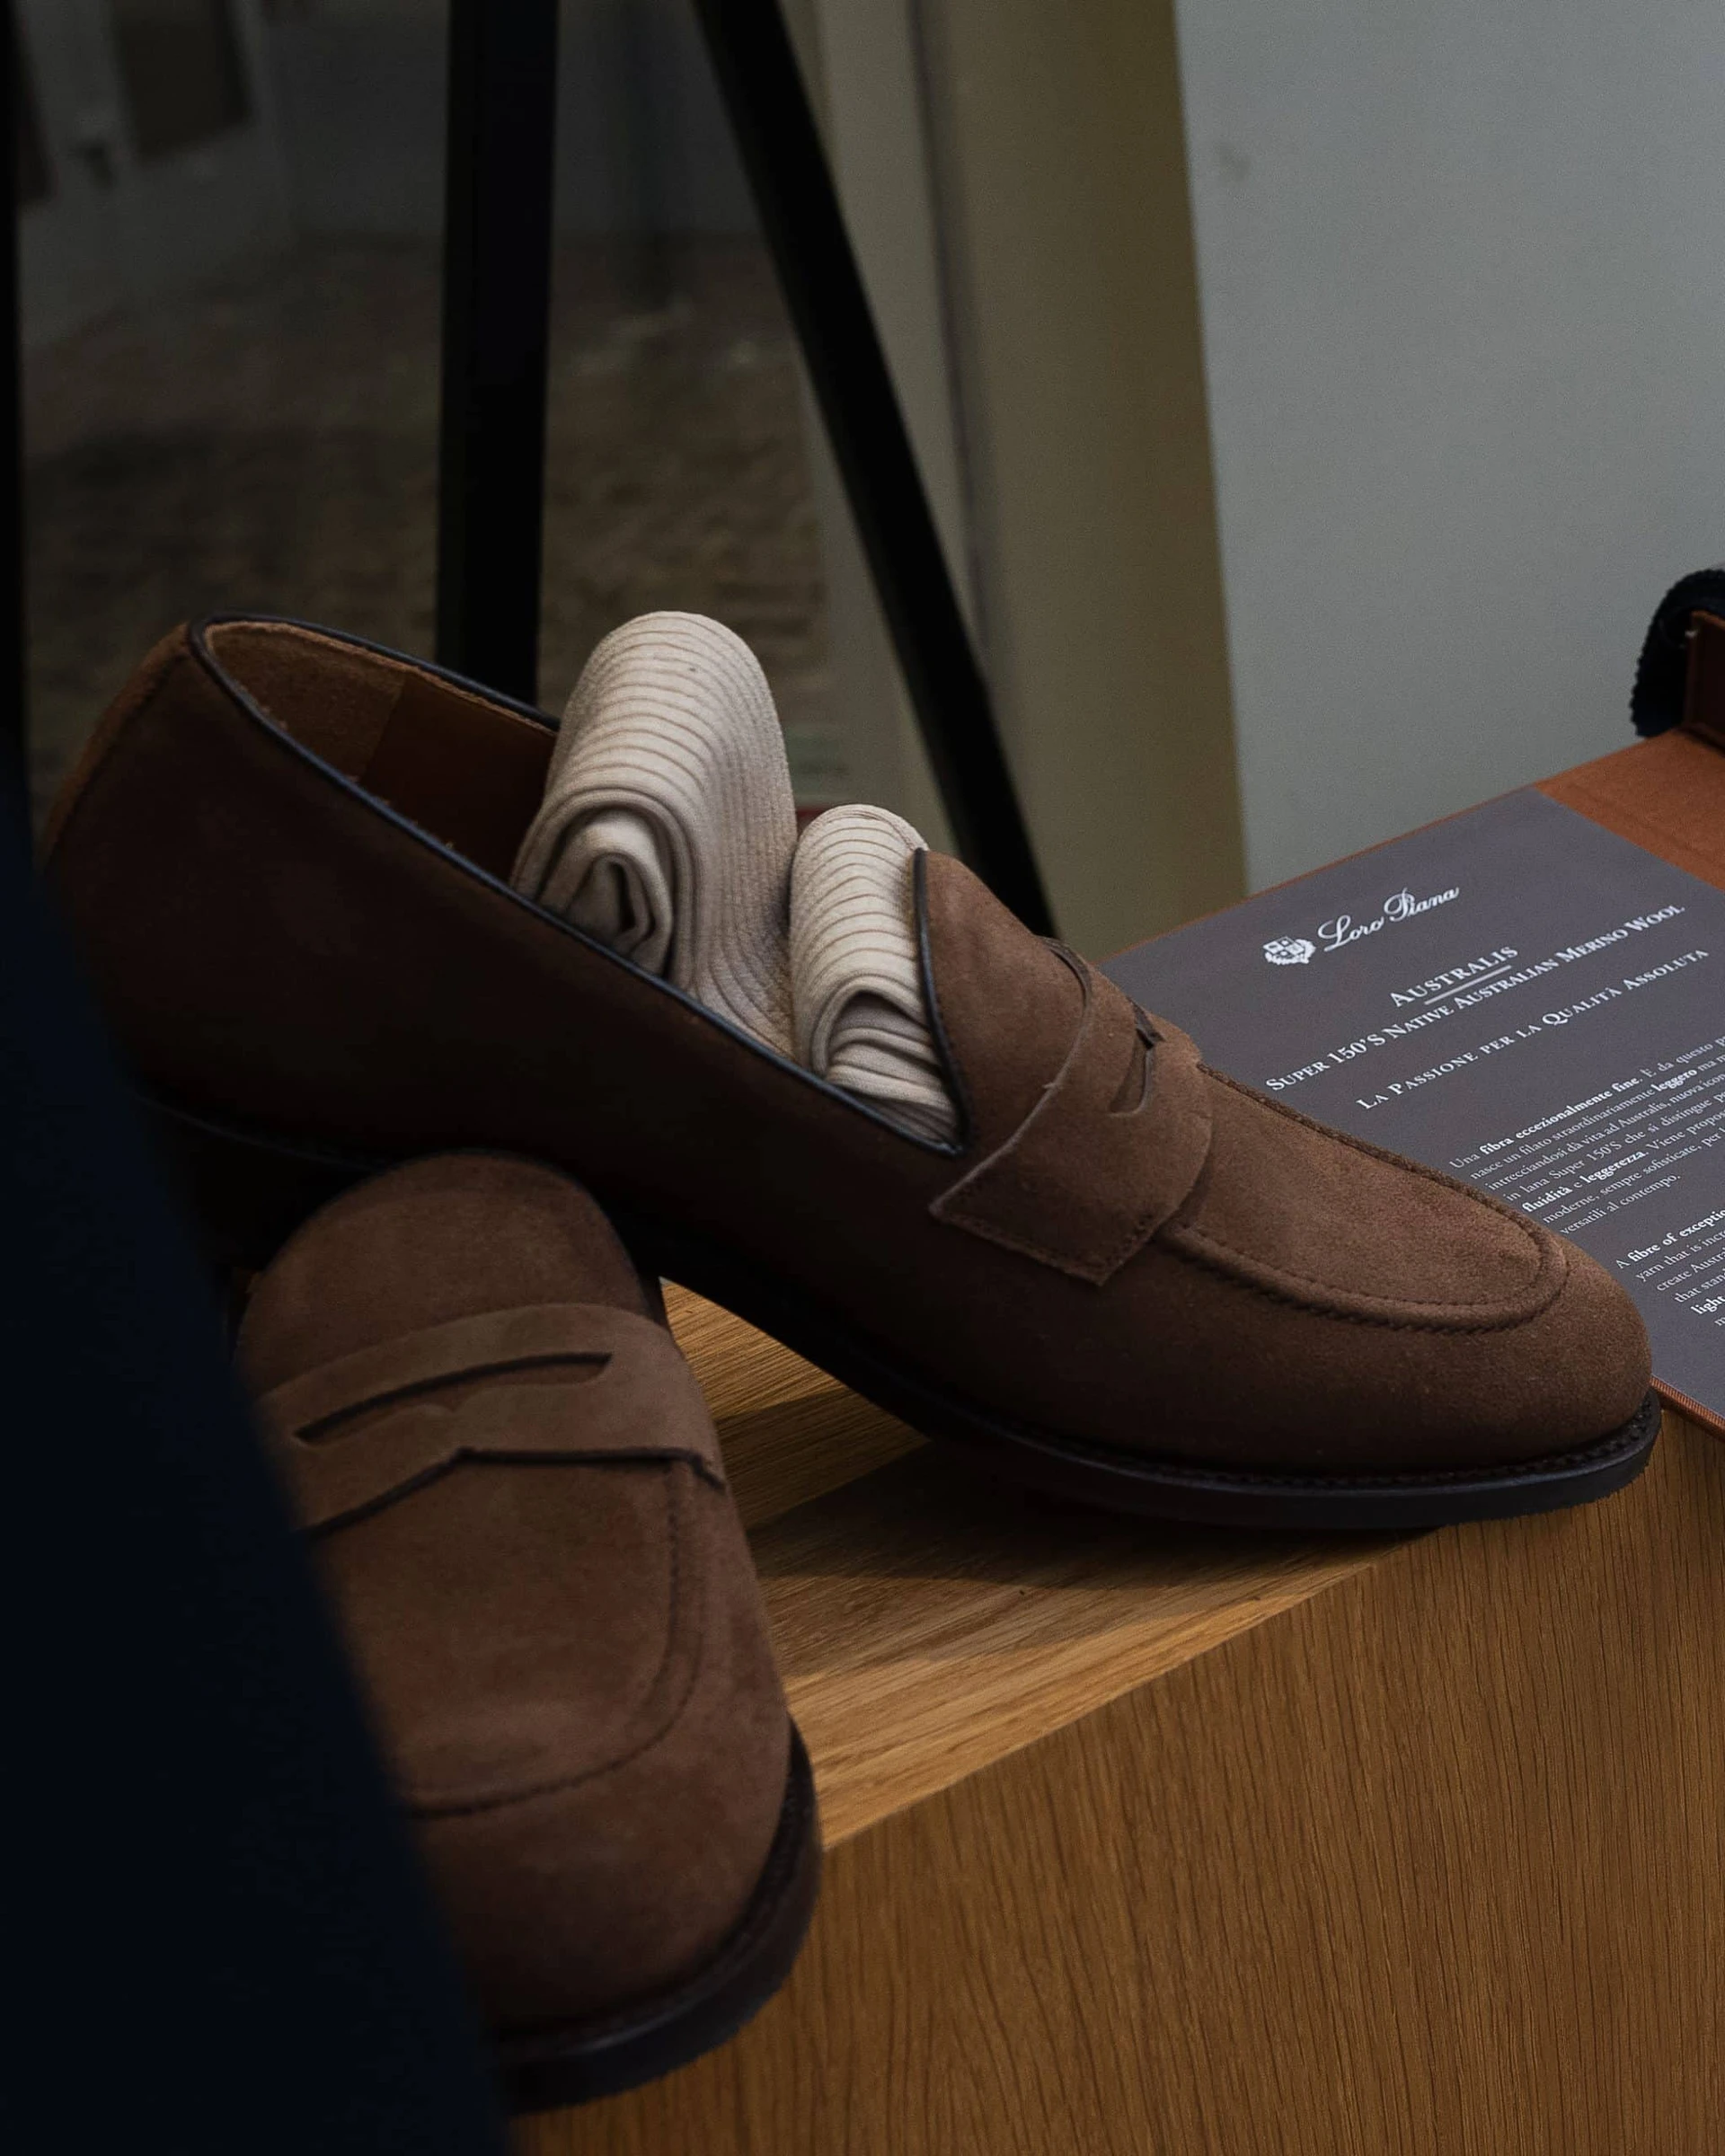 Brown suede loafers by Mond, with a pair of rifled beige socks rolled up into one of them